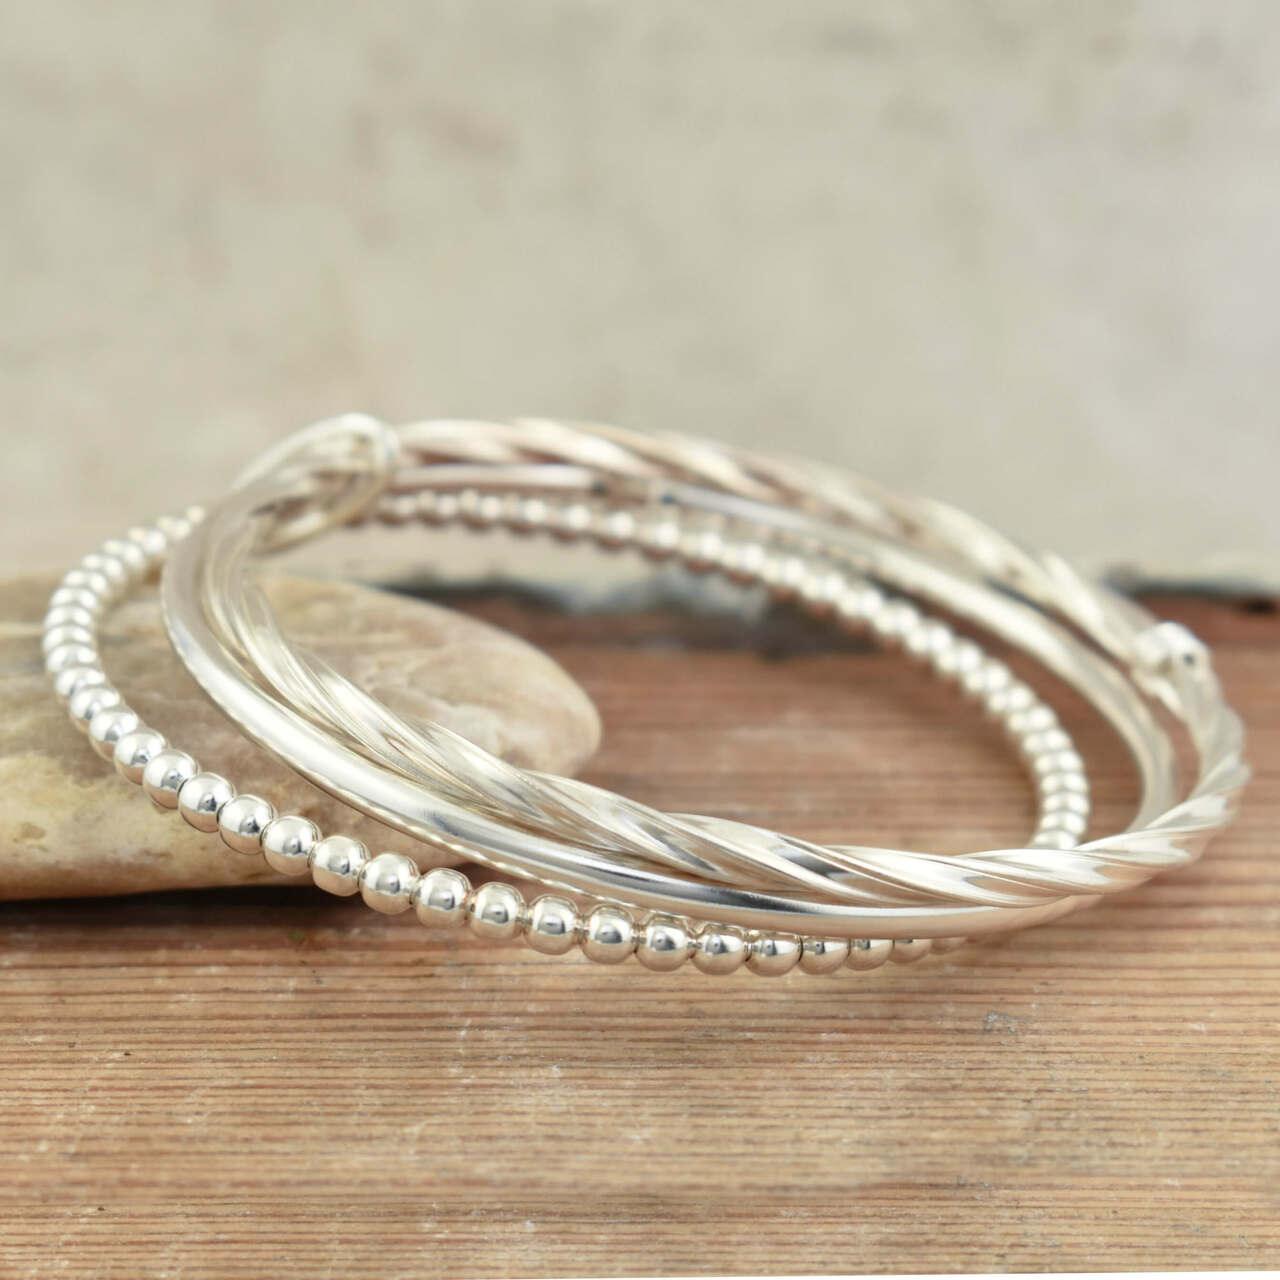 Silver plated bangles bracelet for women at ₹950